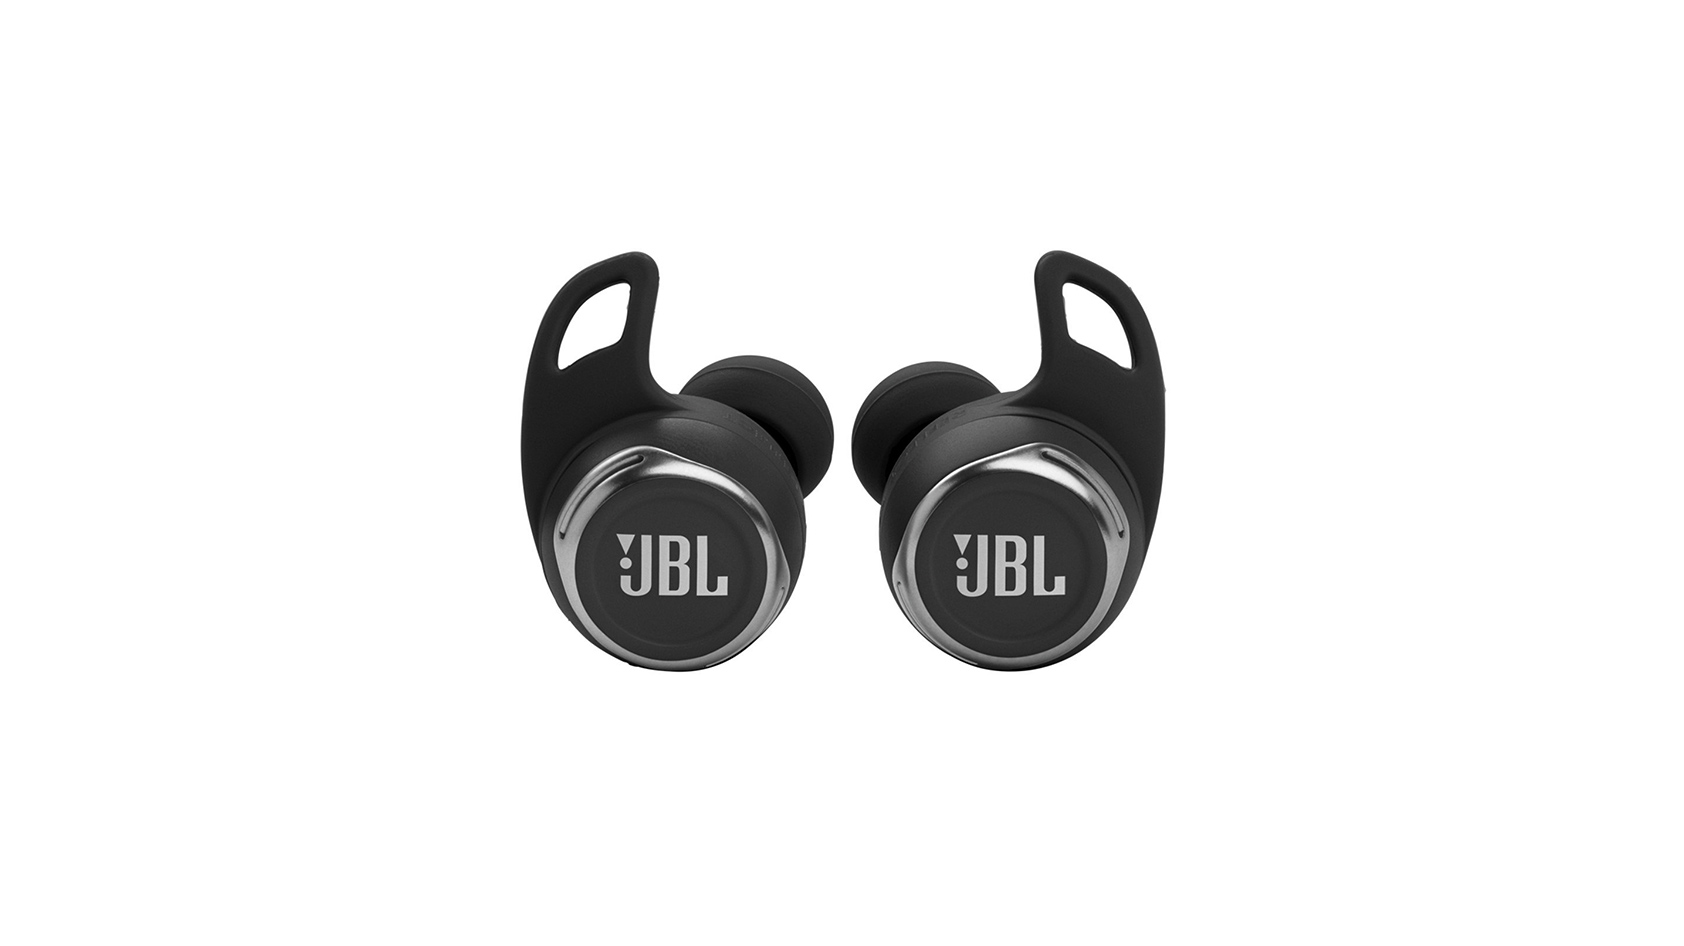 The JBL Reflect Flow Pro true wireless earbuds in black against a white background.